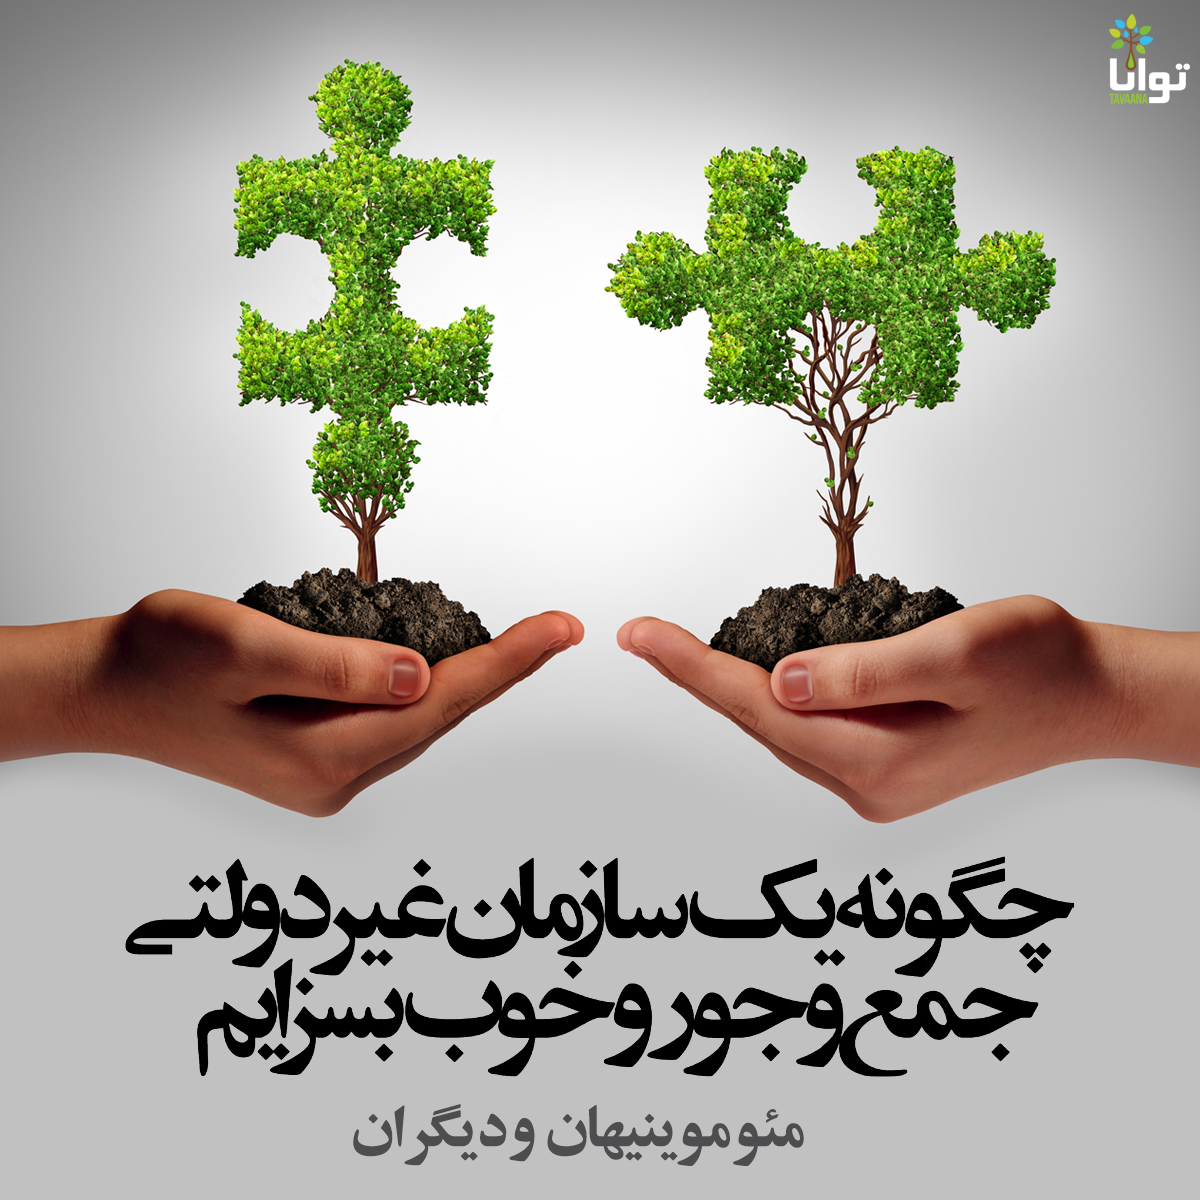 Two hands extend into the picture, holding mounds of earth that are growing complementary green puzzle pieces